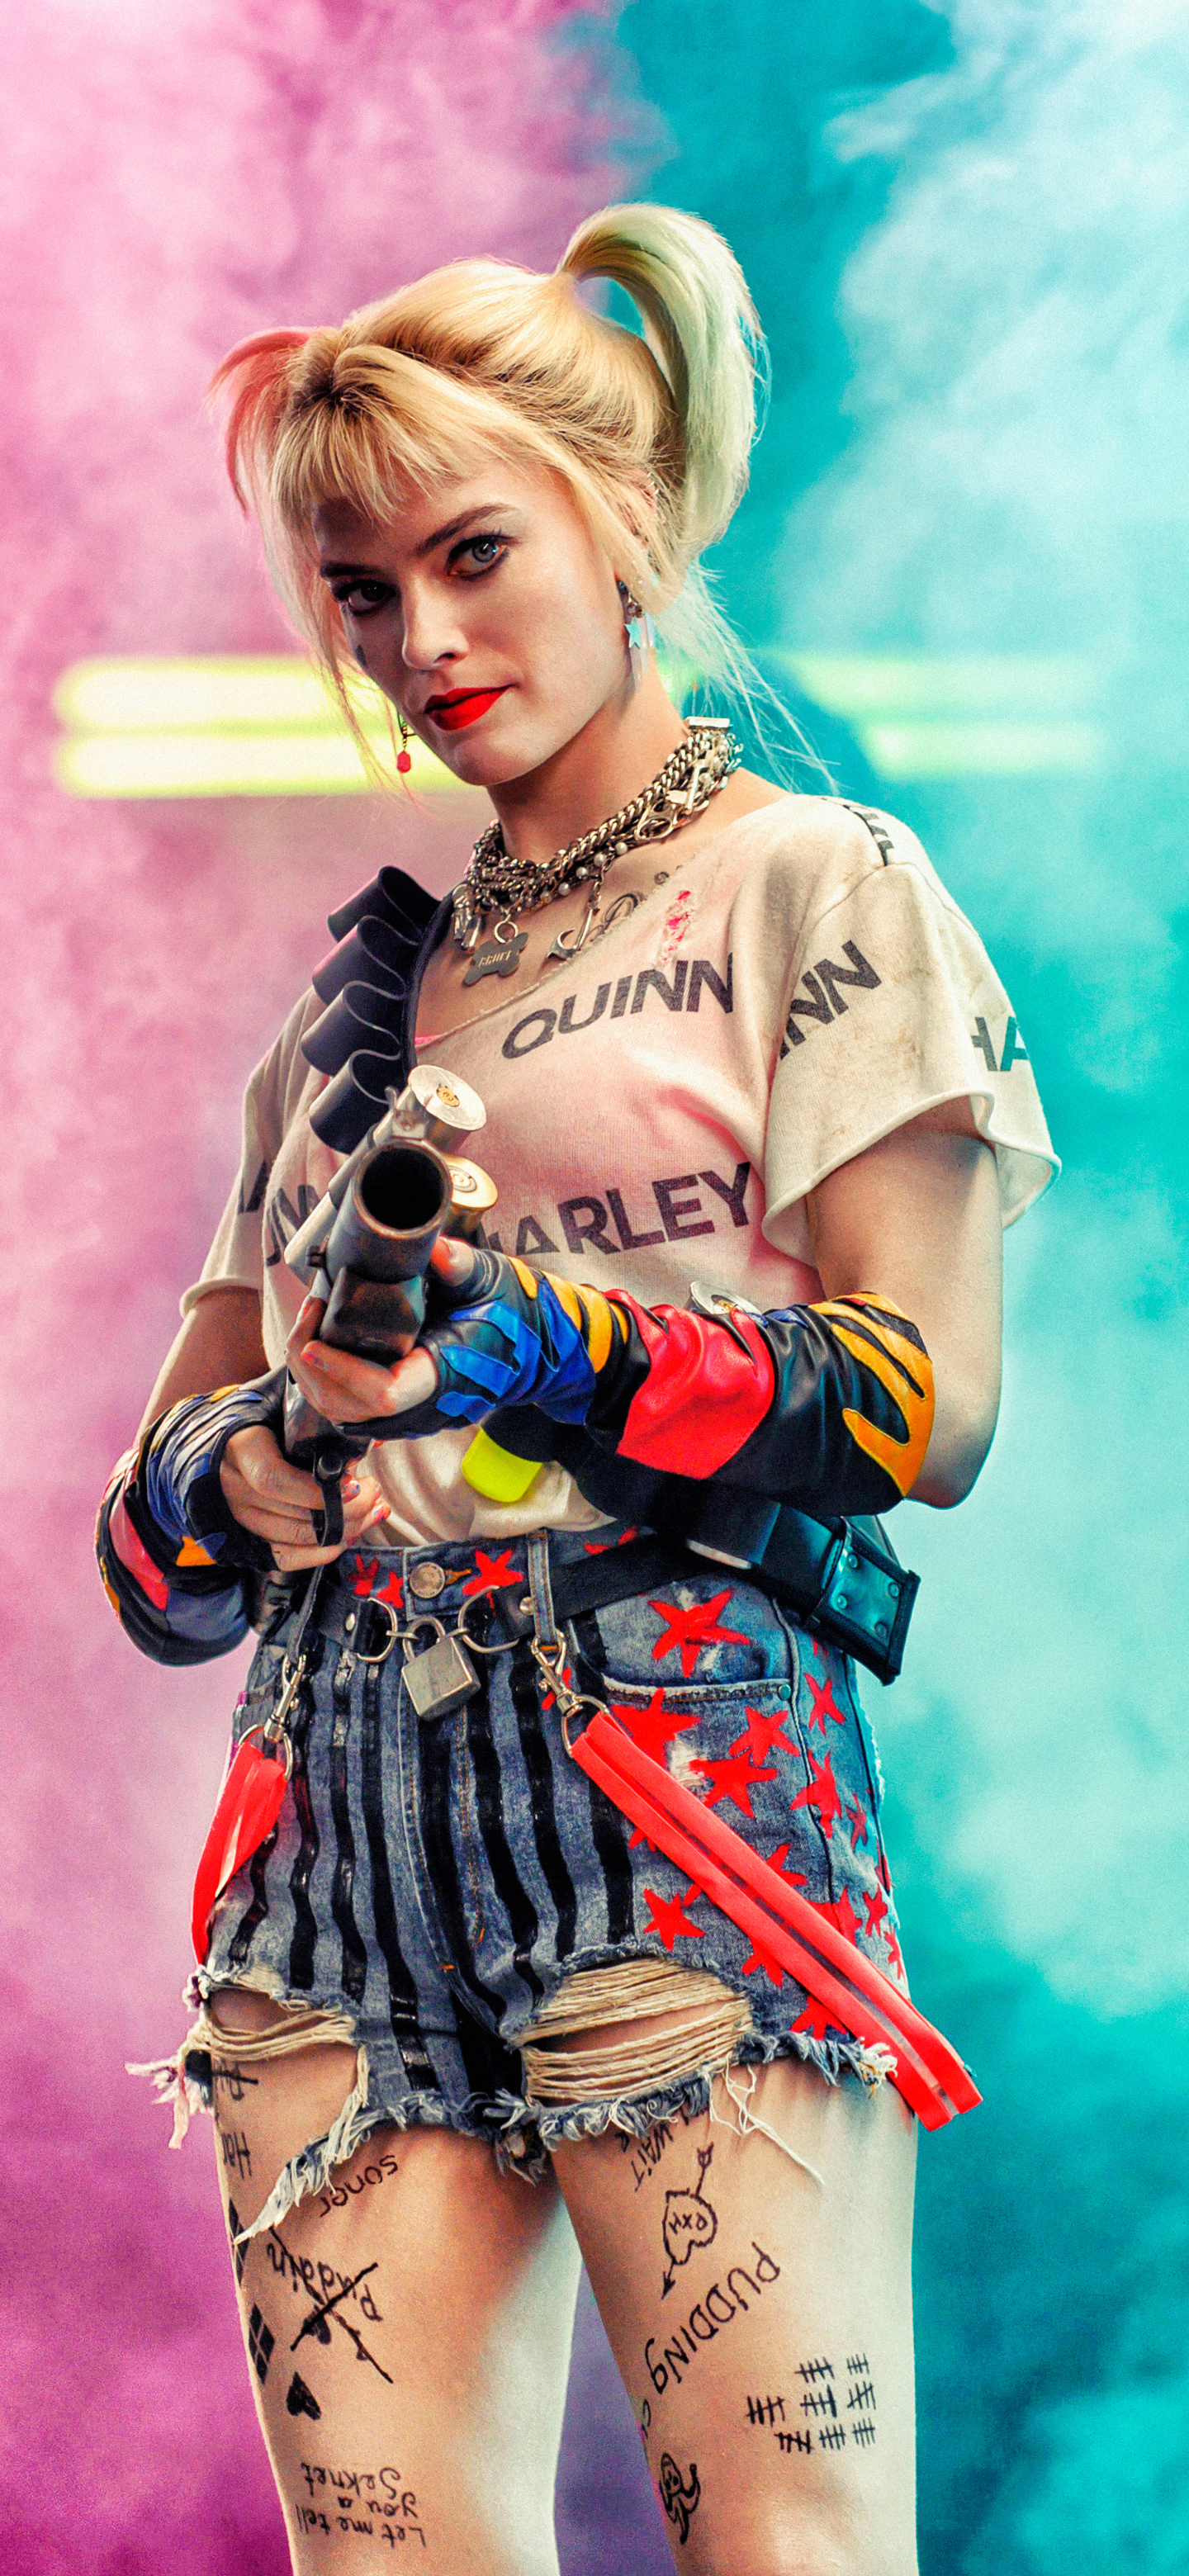 birds of prey (and the fantabulous emancipation of one harley quinn), margot robbie, movie, twintails, harley quinn, dc comics, harleen quinzel cellphone